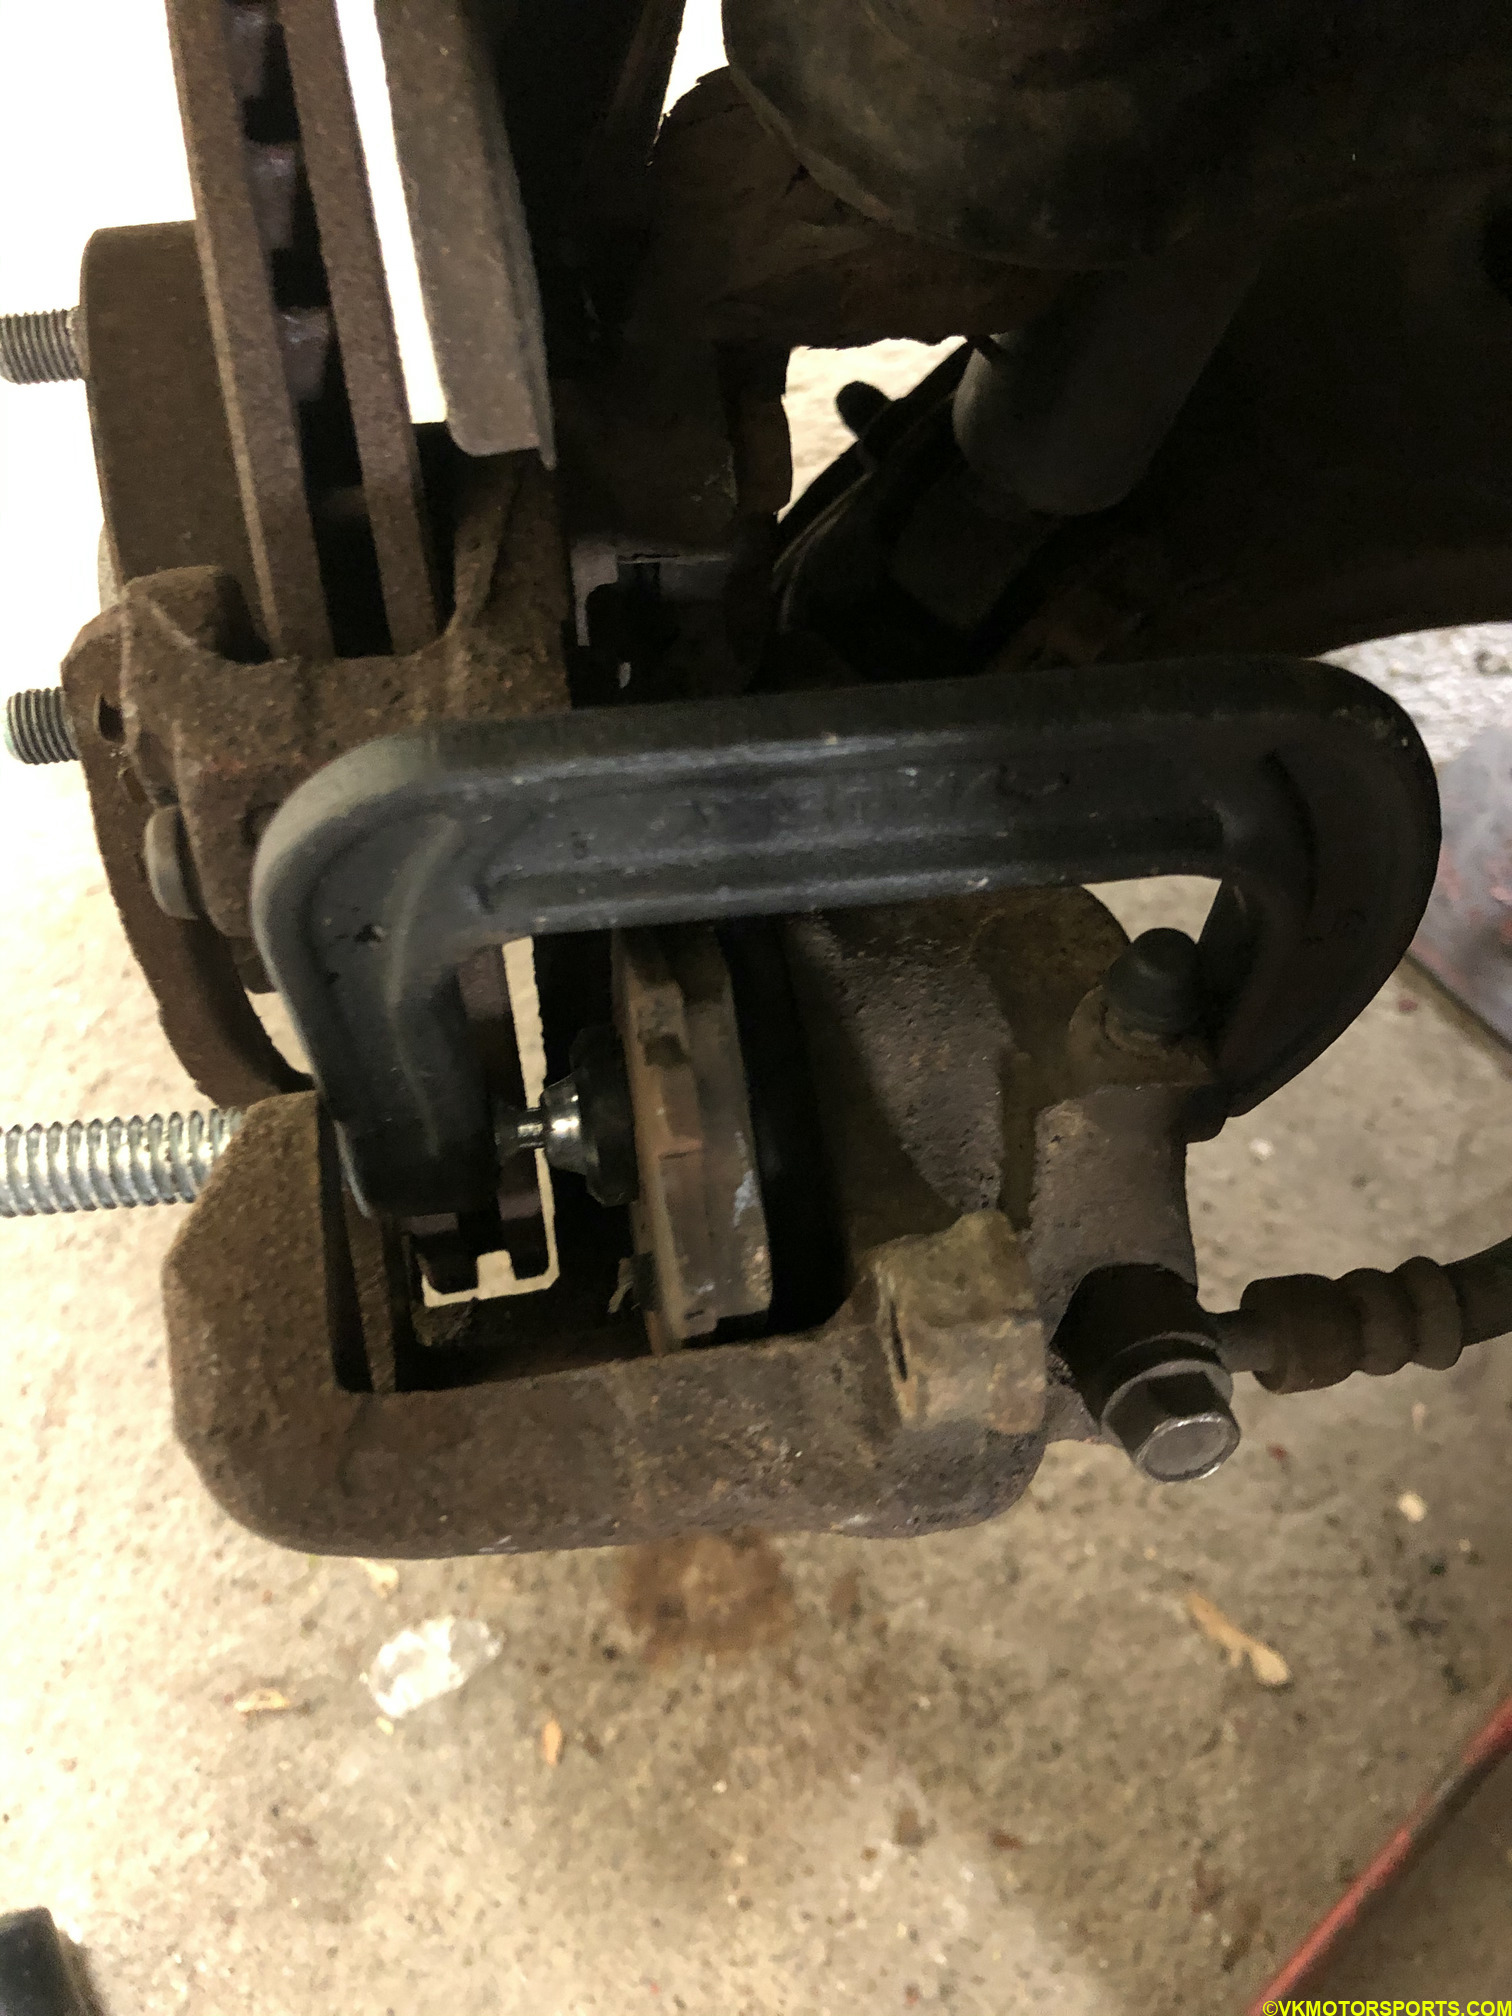 Figure 14. C-clamp and old brake pad against piston